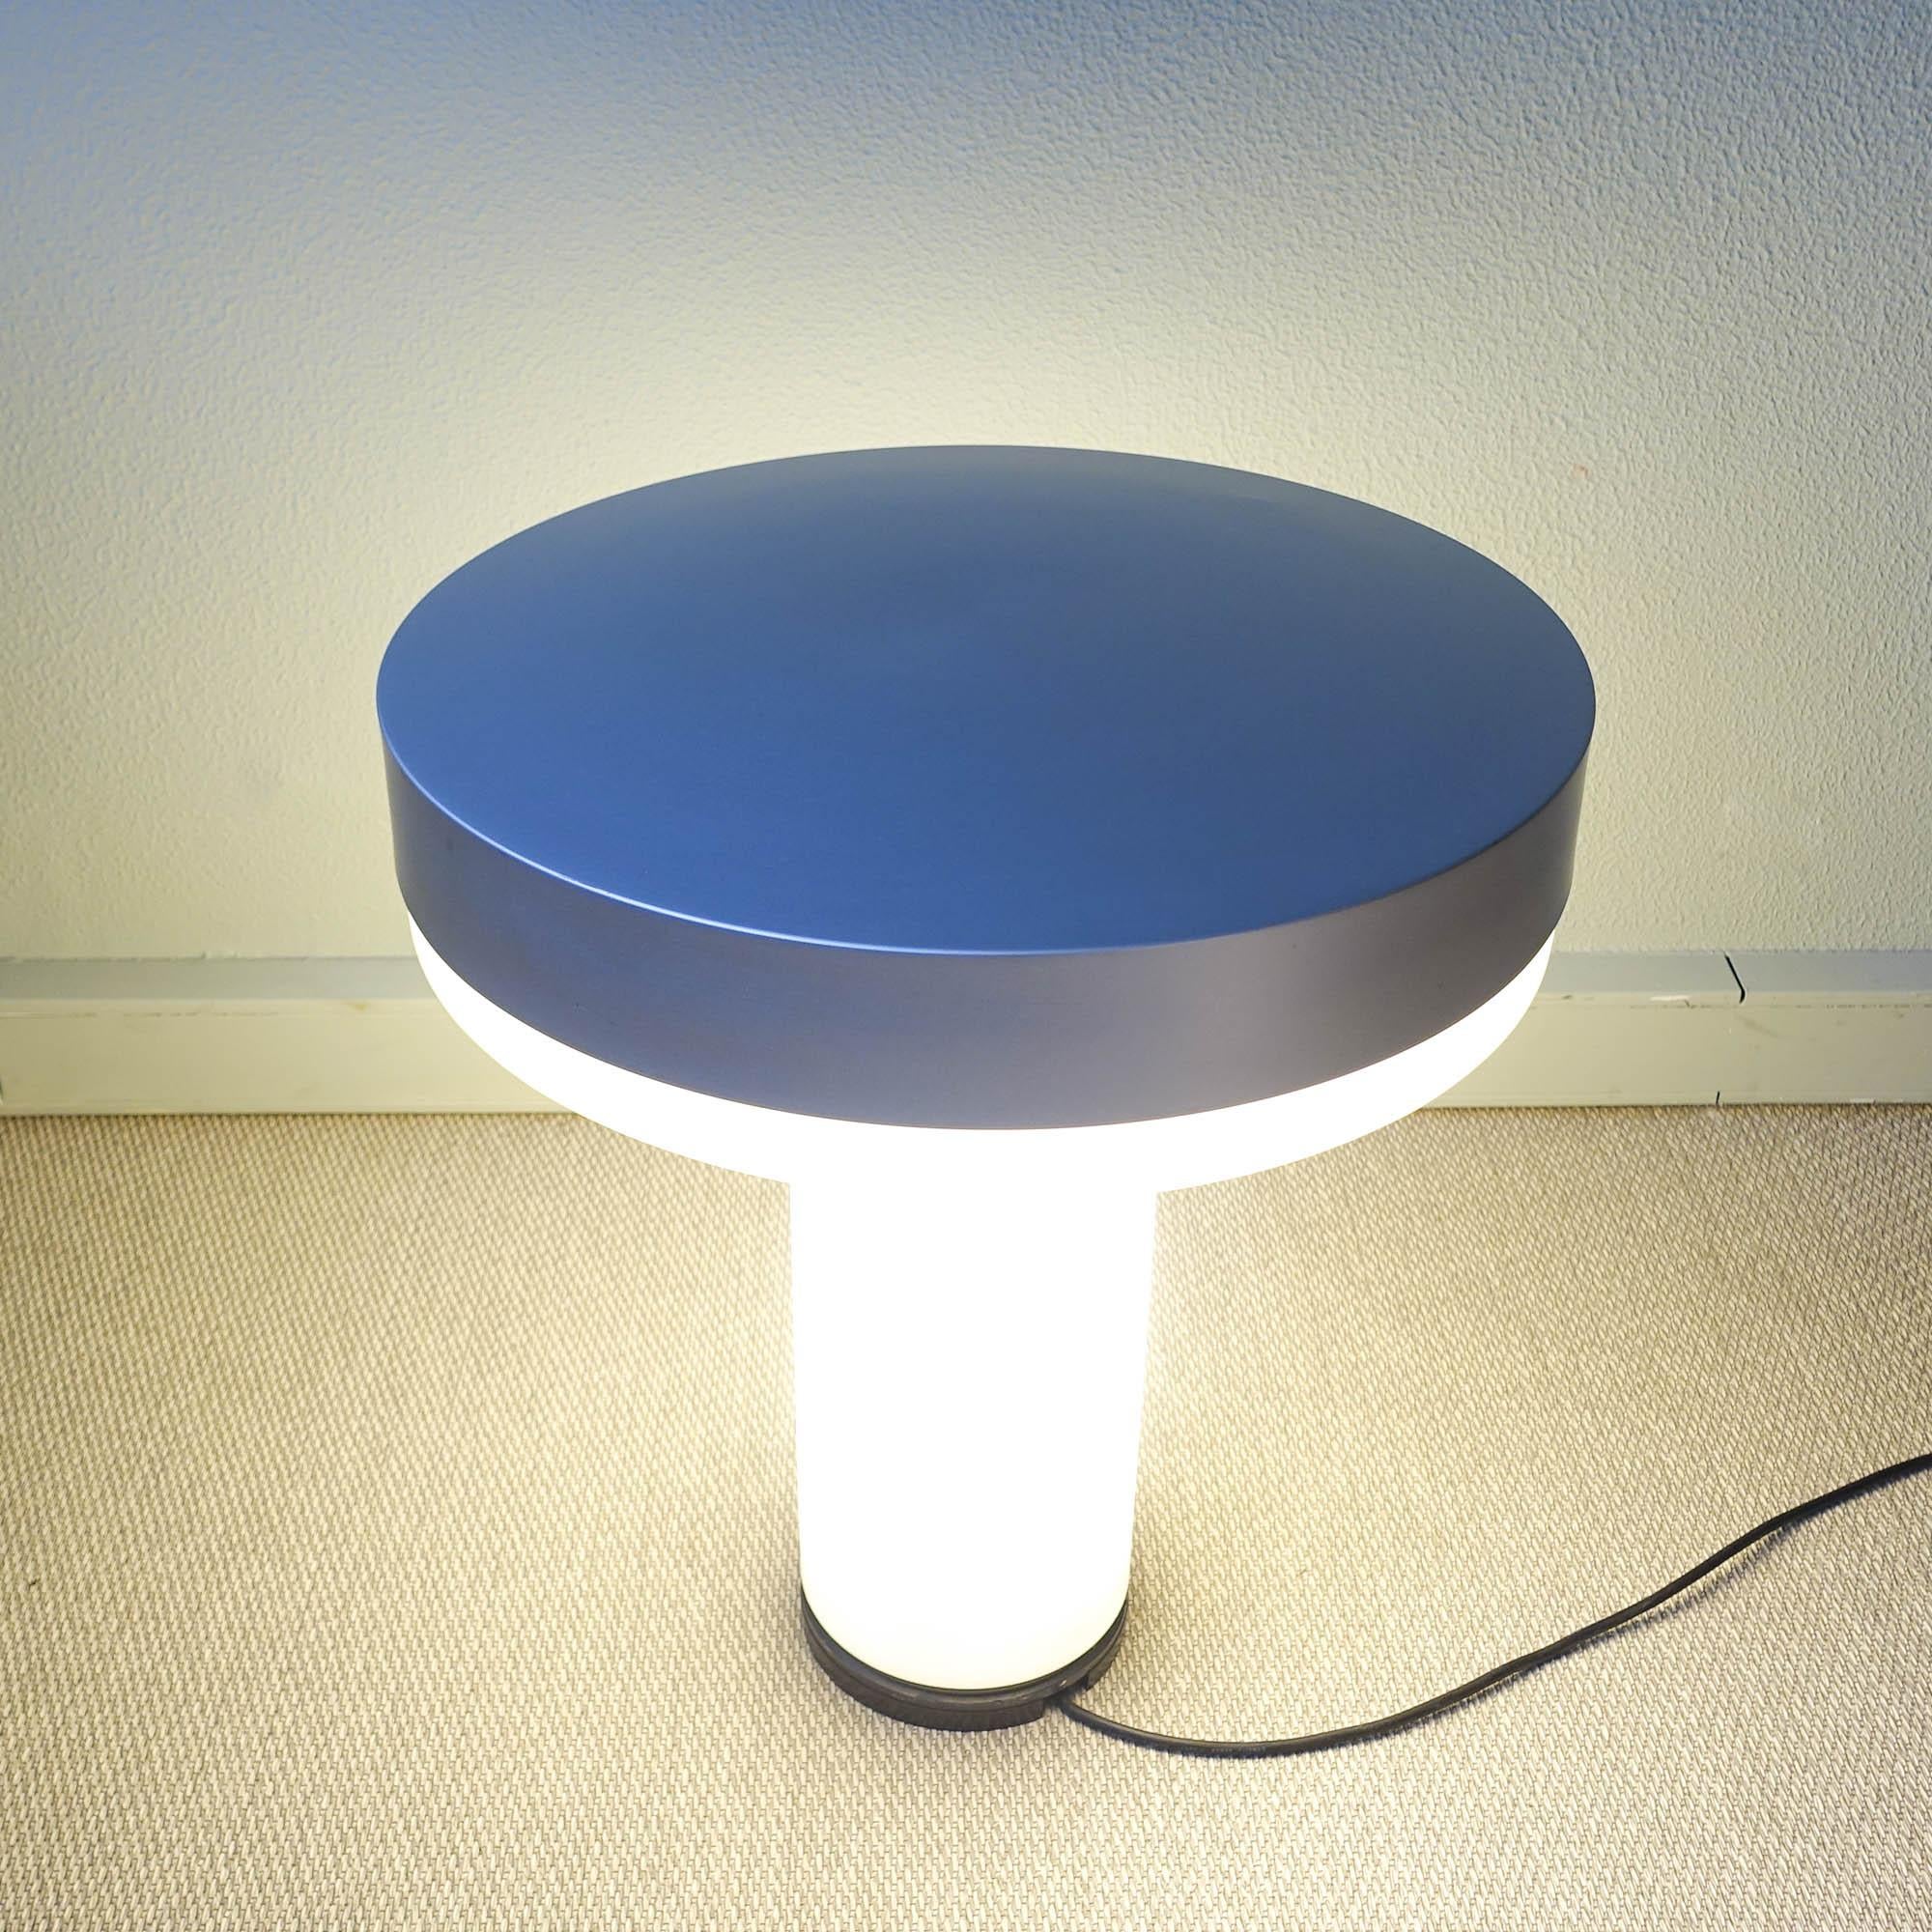 Boletus Outdoor Floor Lamp by Jorge Pensi for B.Lux, 2006 For Sale 4